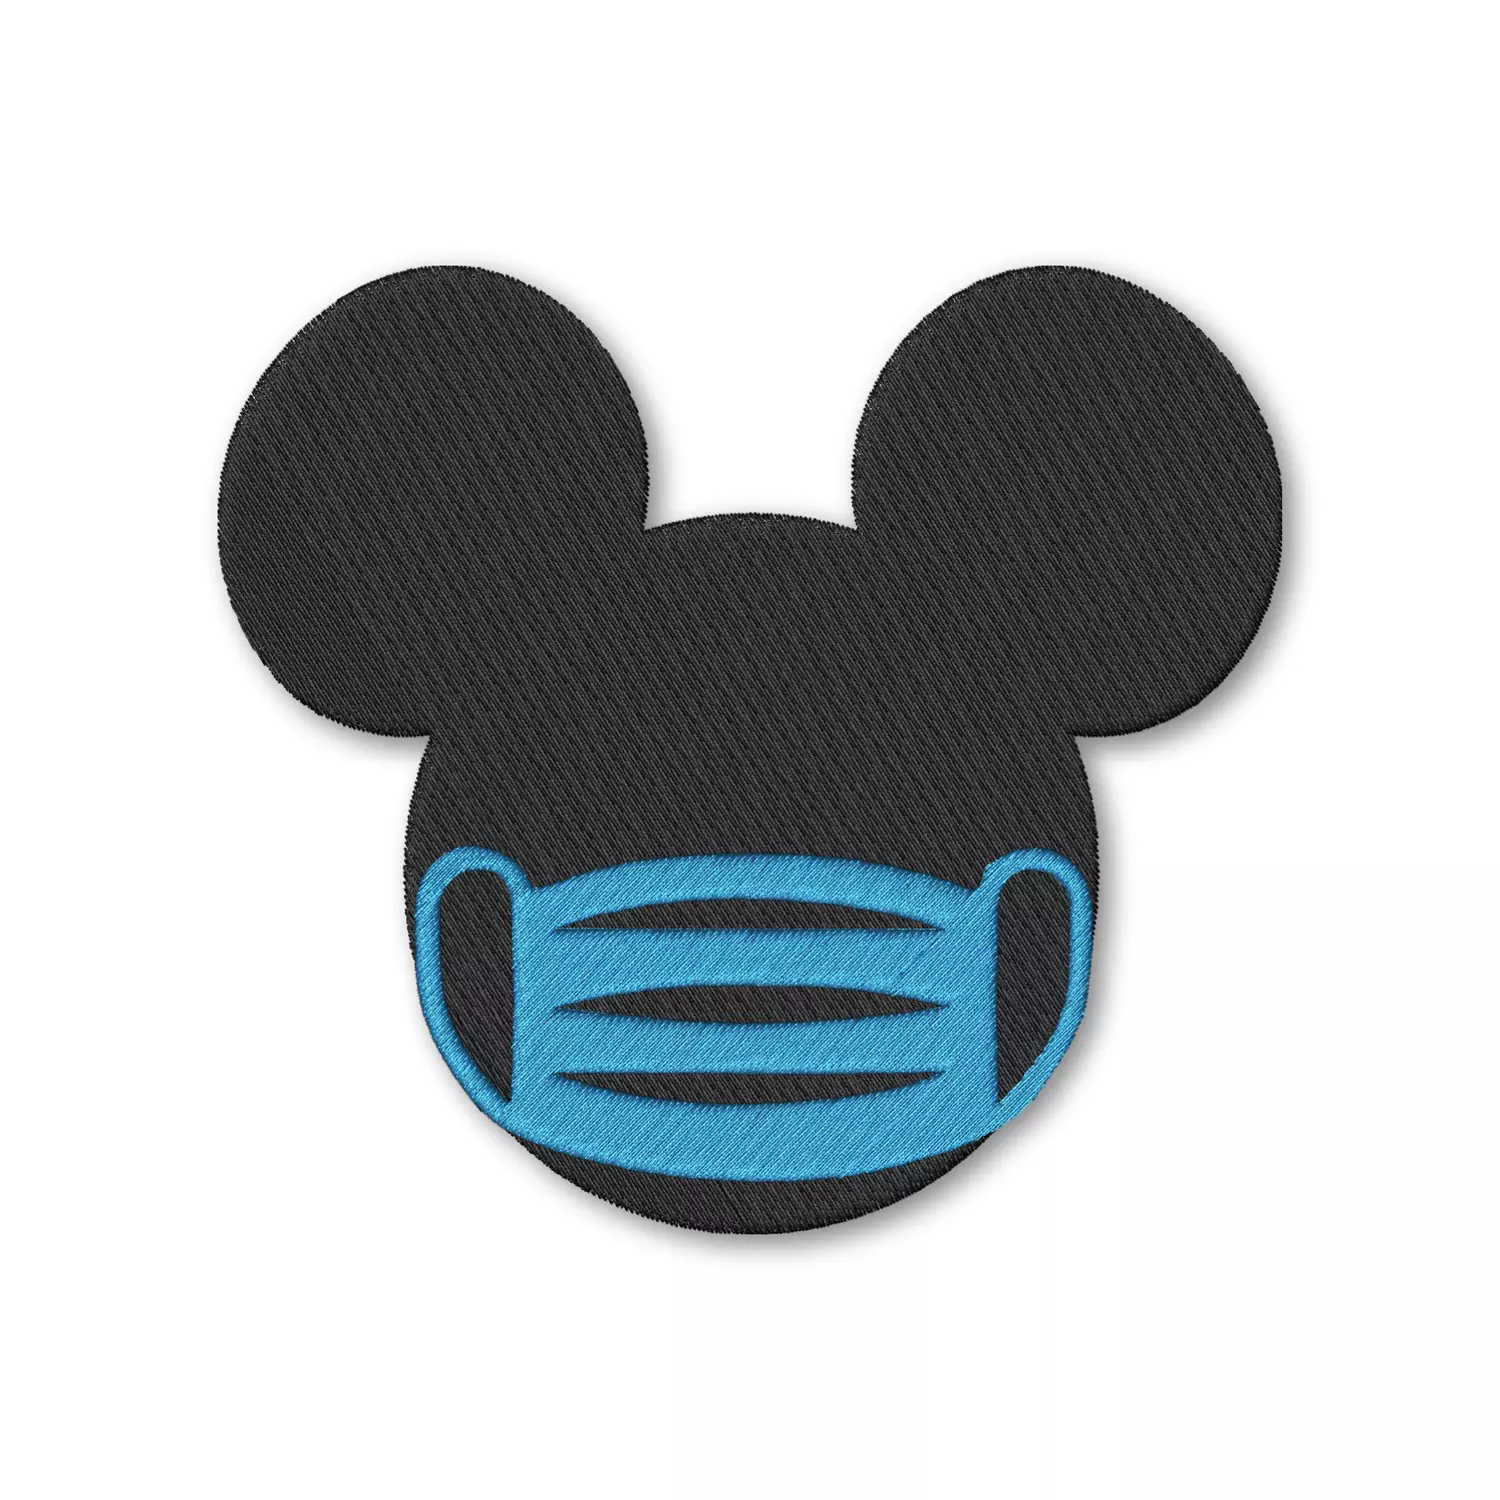 Disney 2020 Quarantined Mickey Mouse Mask face